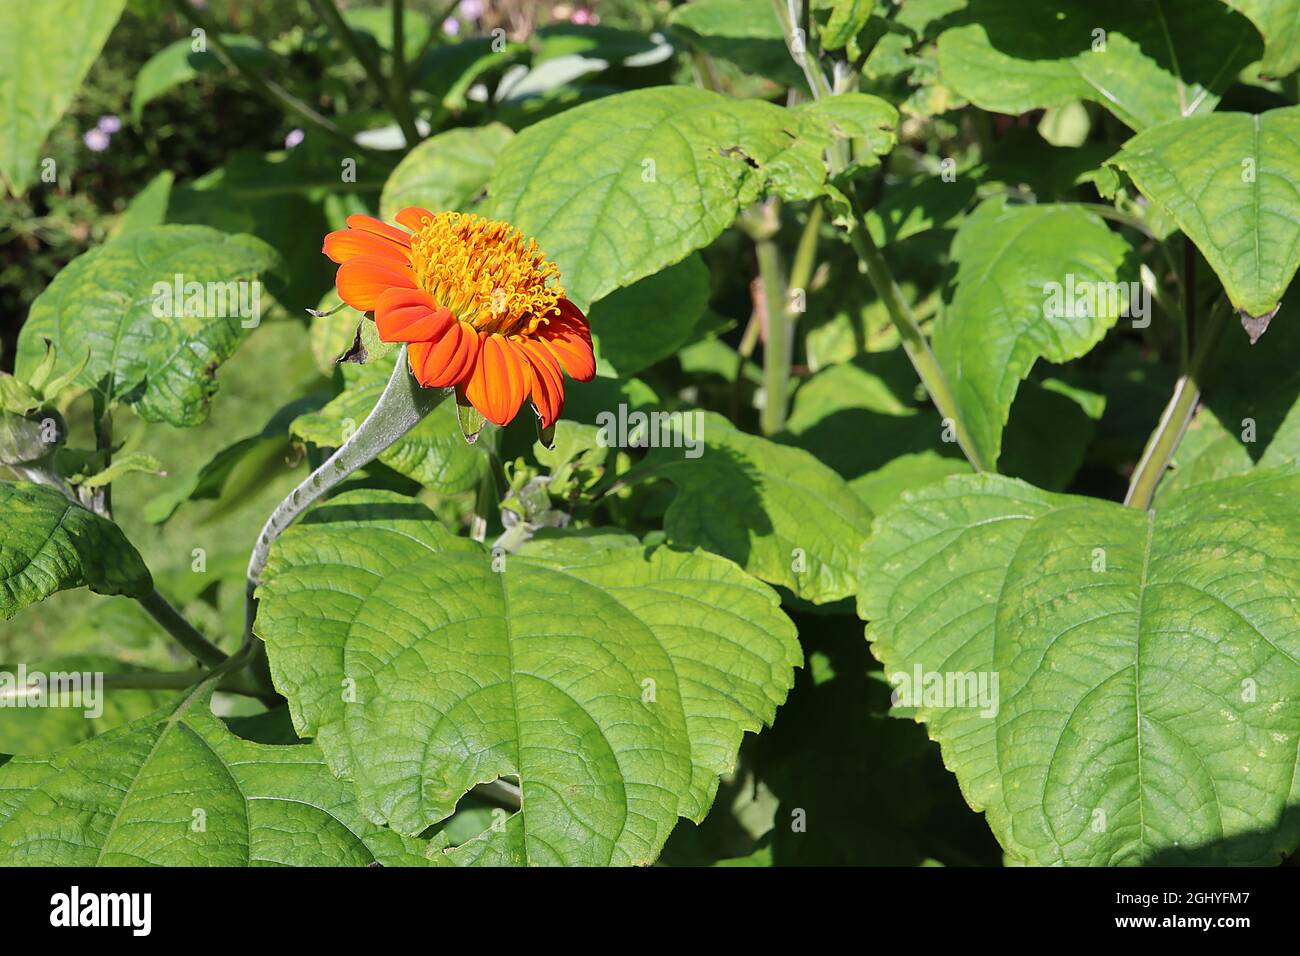 Tithonia rotundifolia ‘Torch’ Mexican sunflower Torch – bright orange daisy-like flowers and mid green broad ovate and deeply lobed leaves,  August,UK Stock Photo